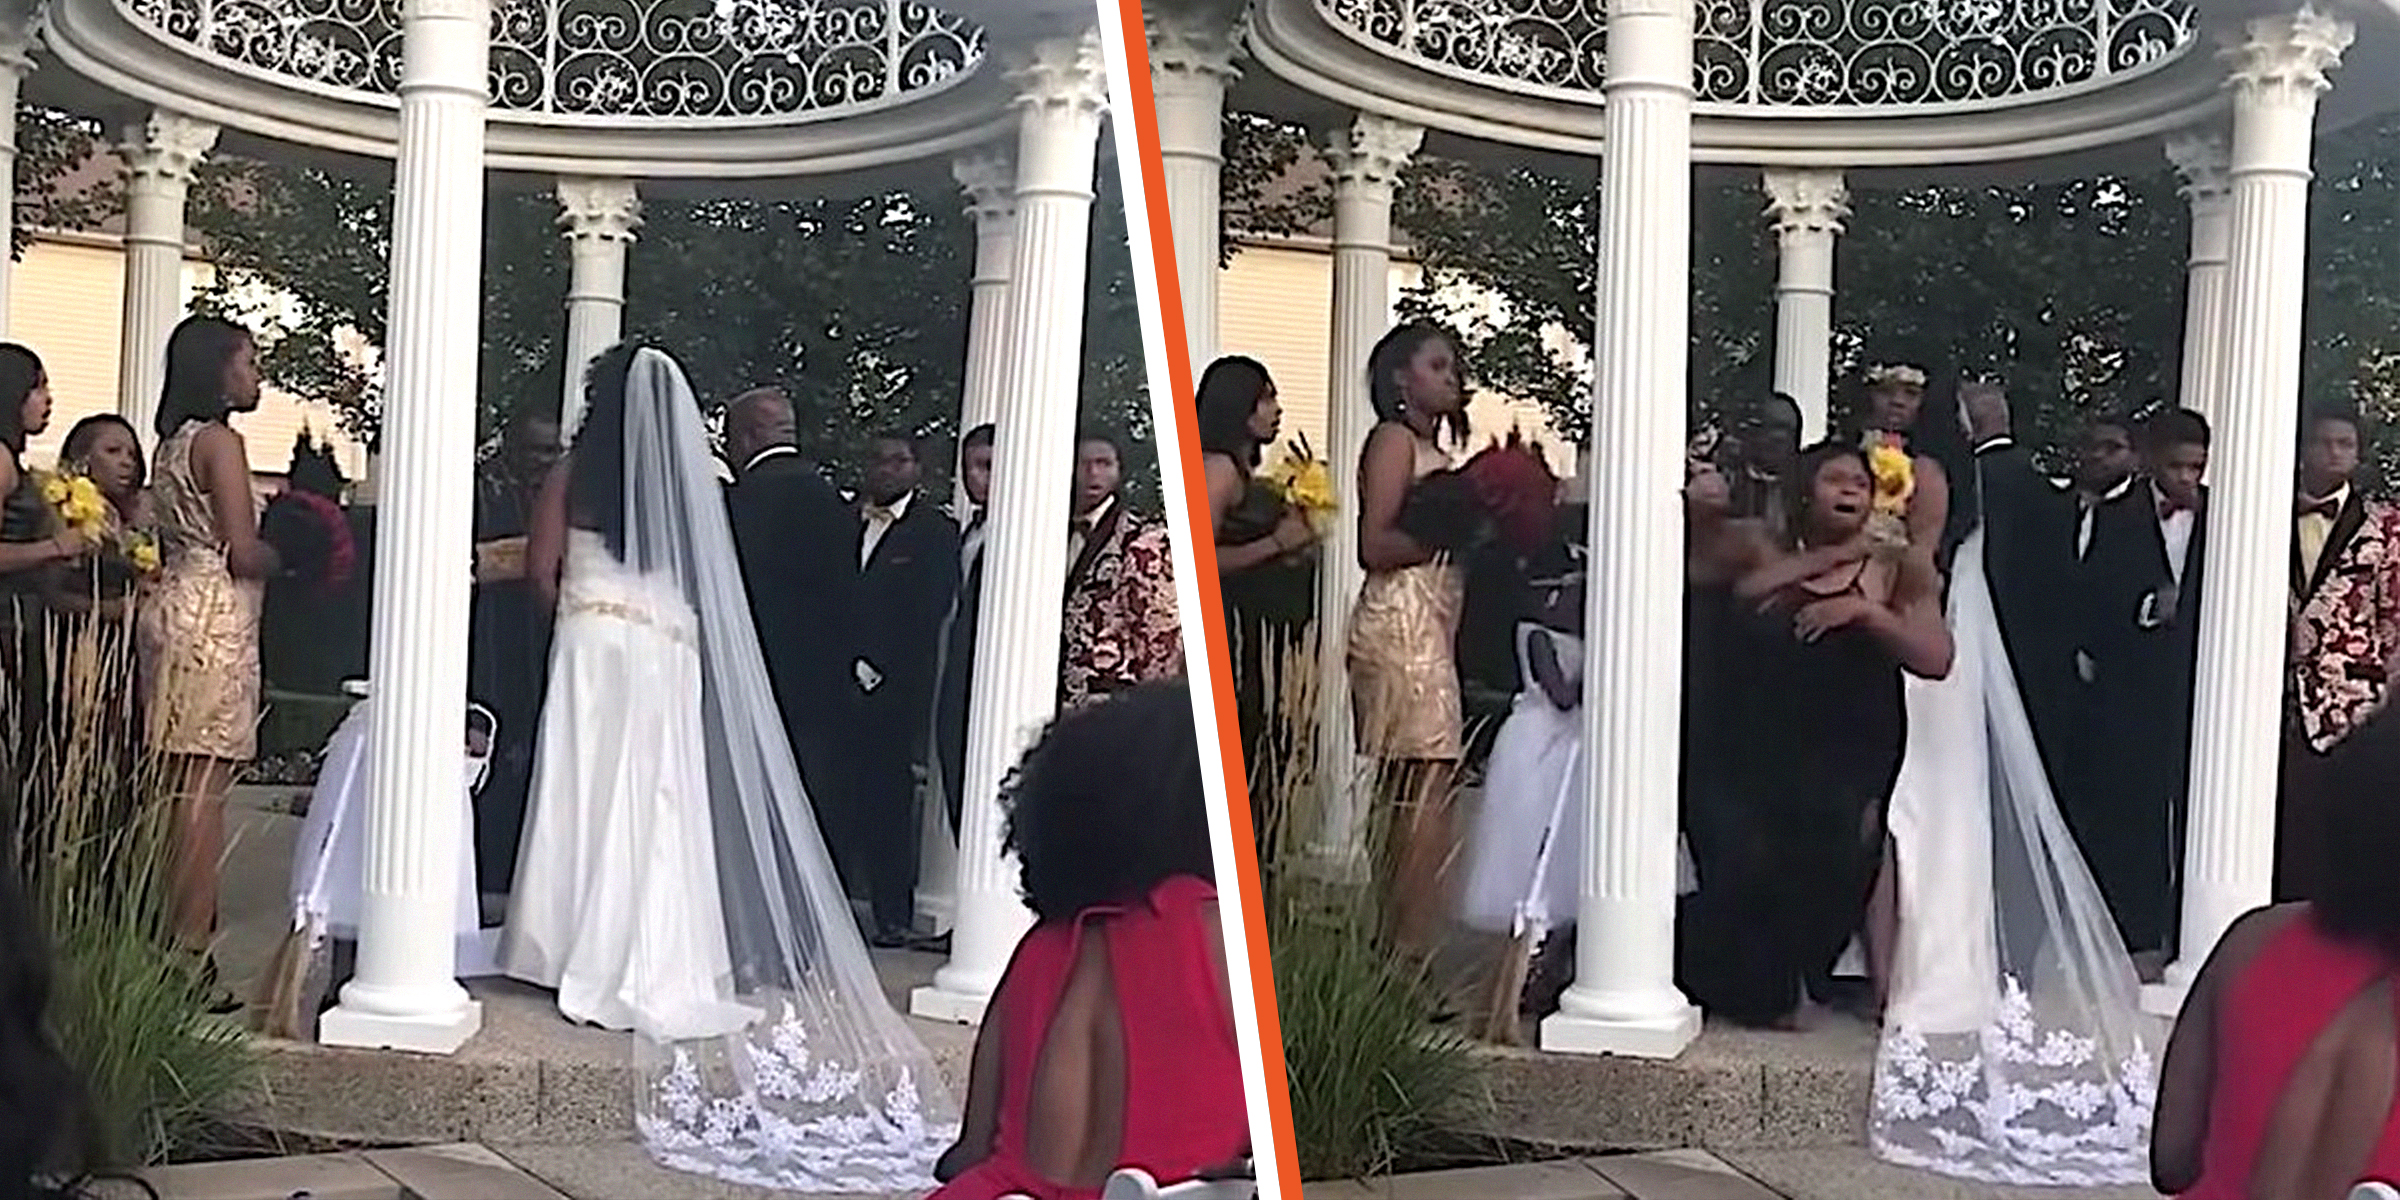 The wedding interrupted by the pregnant woman | Source : youtube.com/ Toneciaga